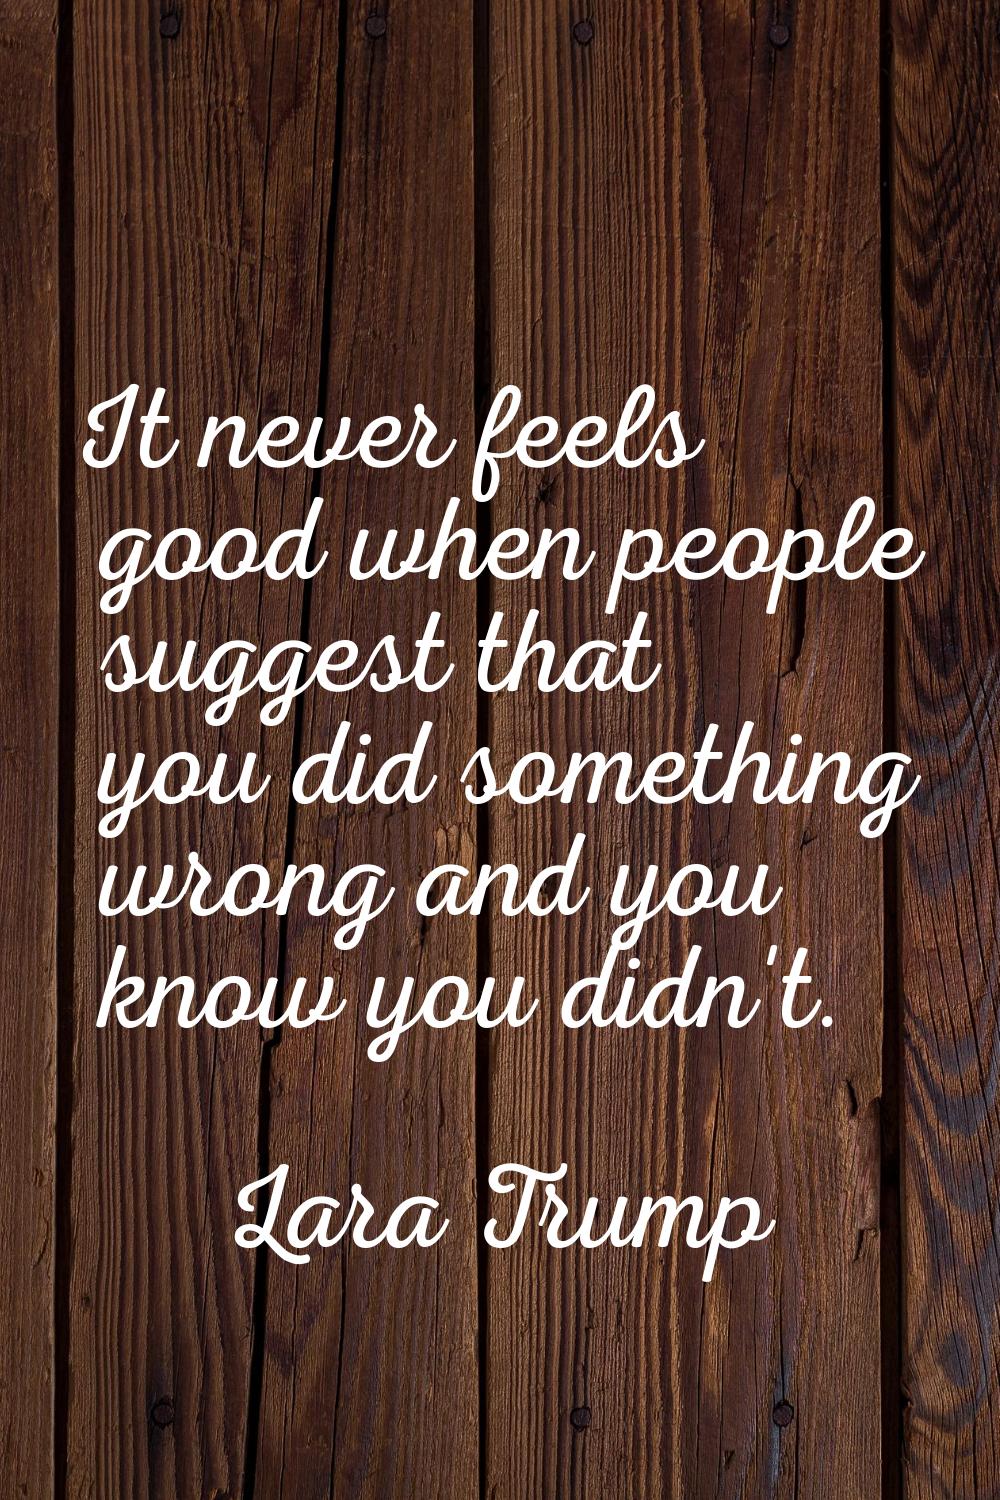 It never feels good when people suggest that you did something wrong and you know you didn't.